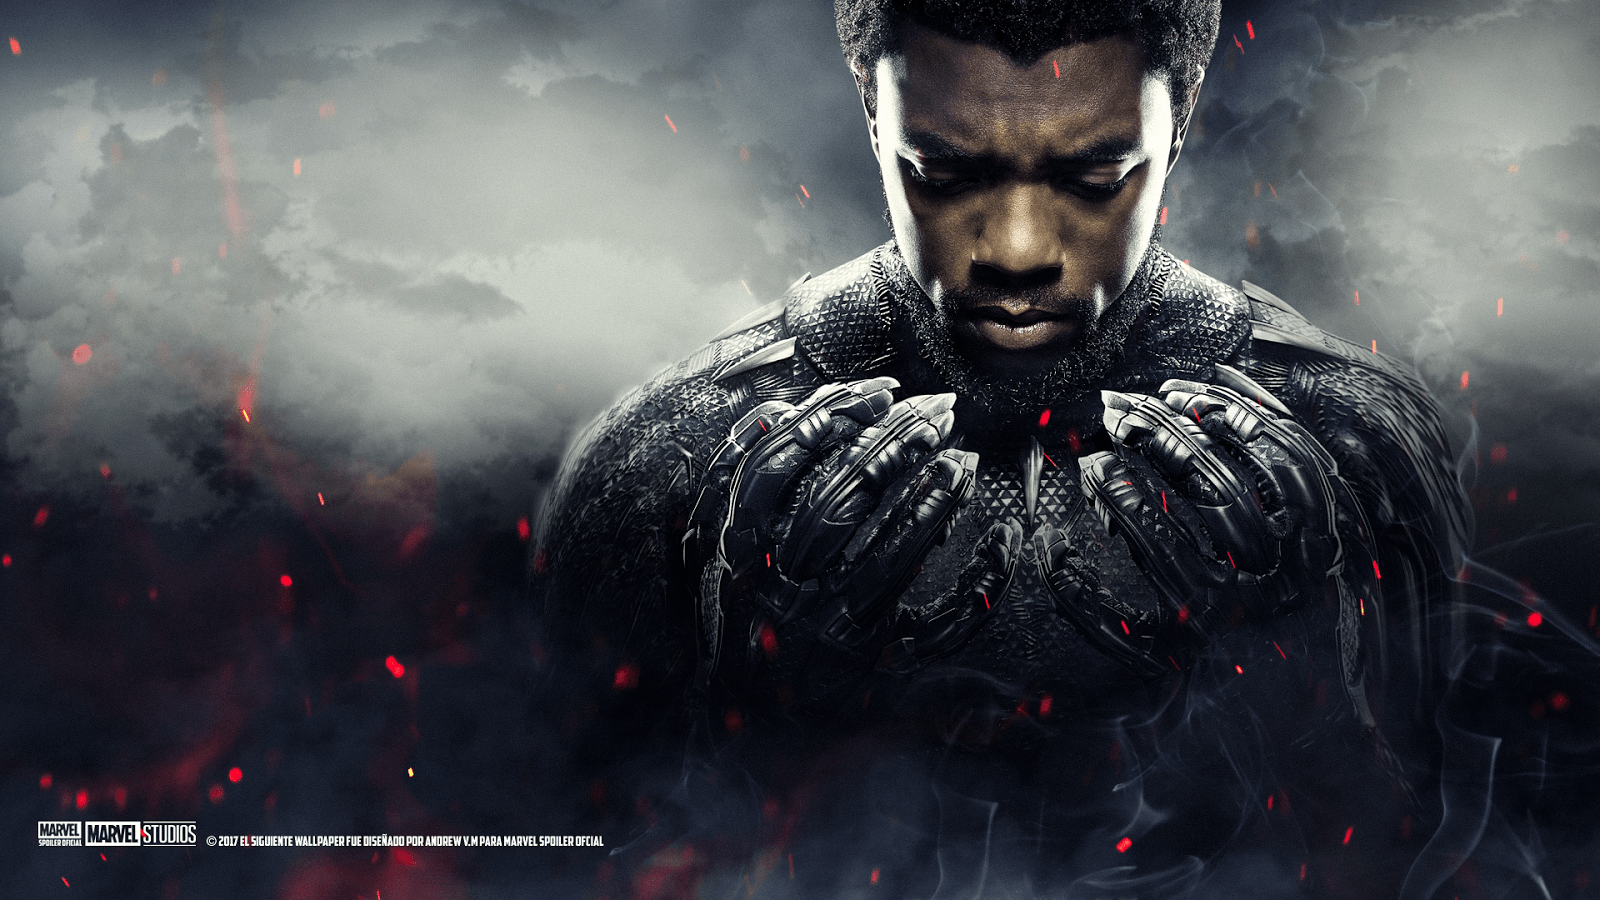 Black Panther Movie Poster Hd Wallpapers